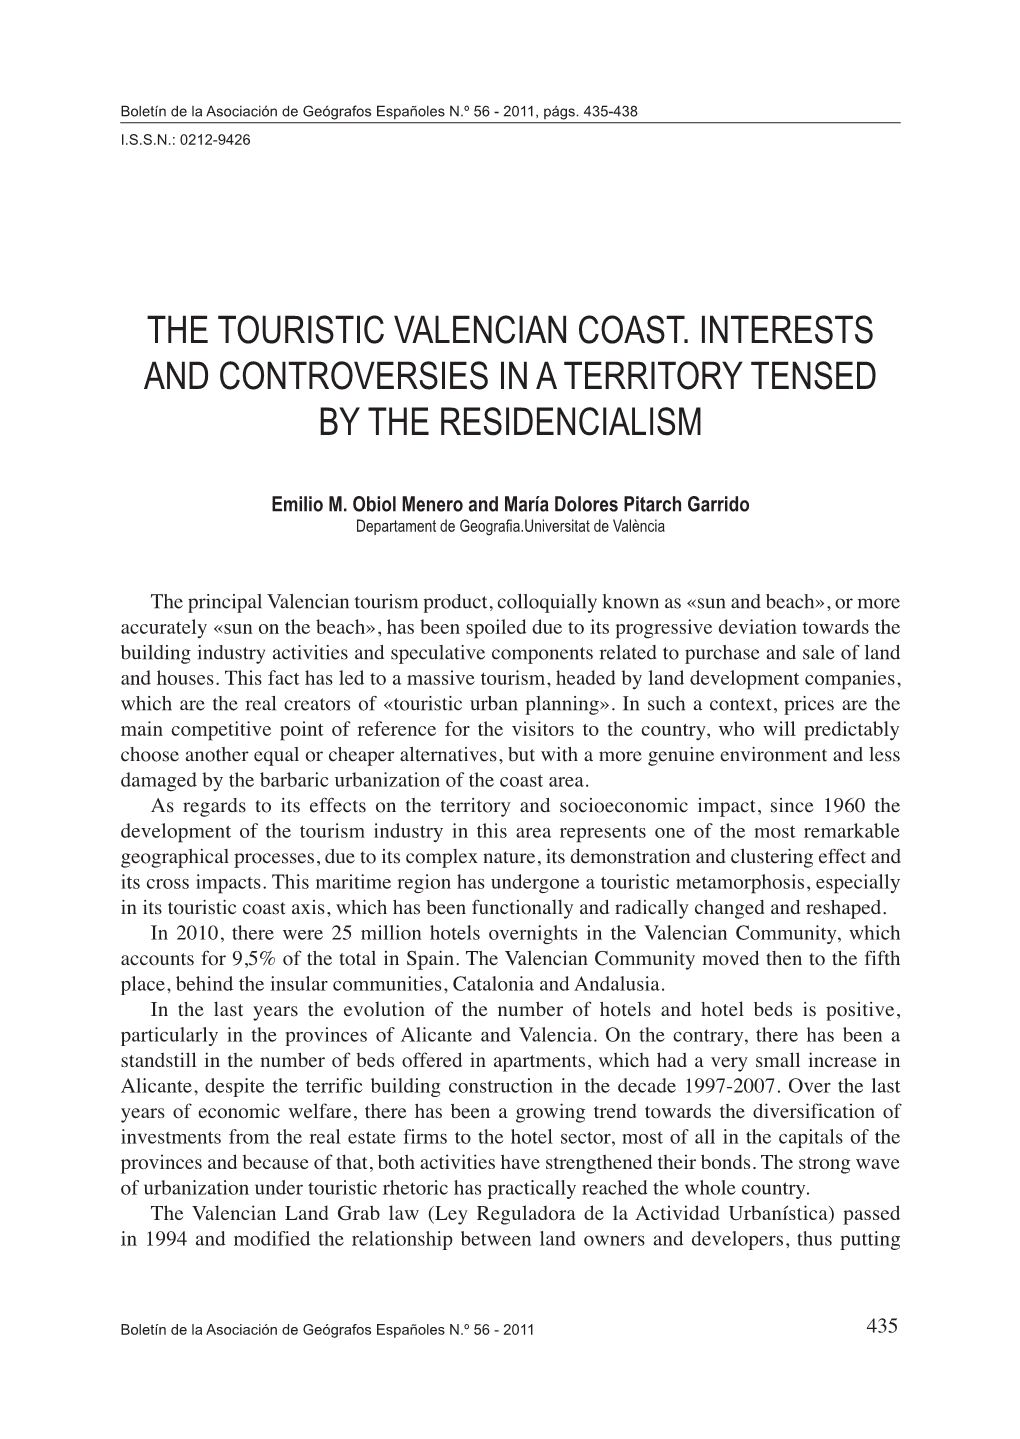 The Touristic Valencian Coast. Interests and Controversies in a Territory Tensed by the Residencialism